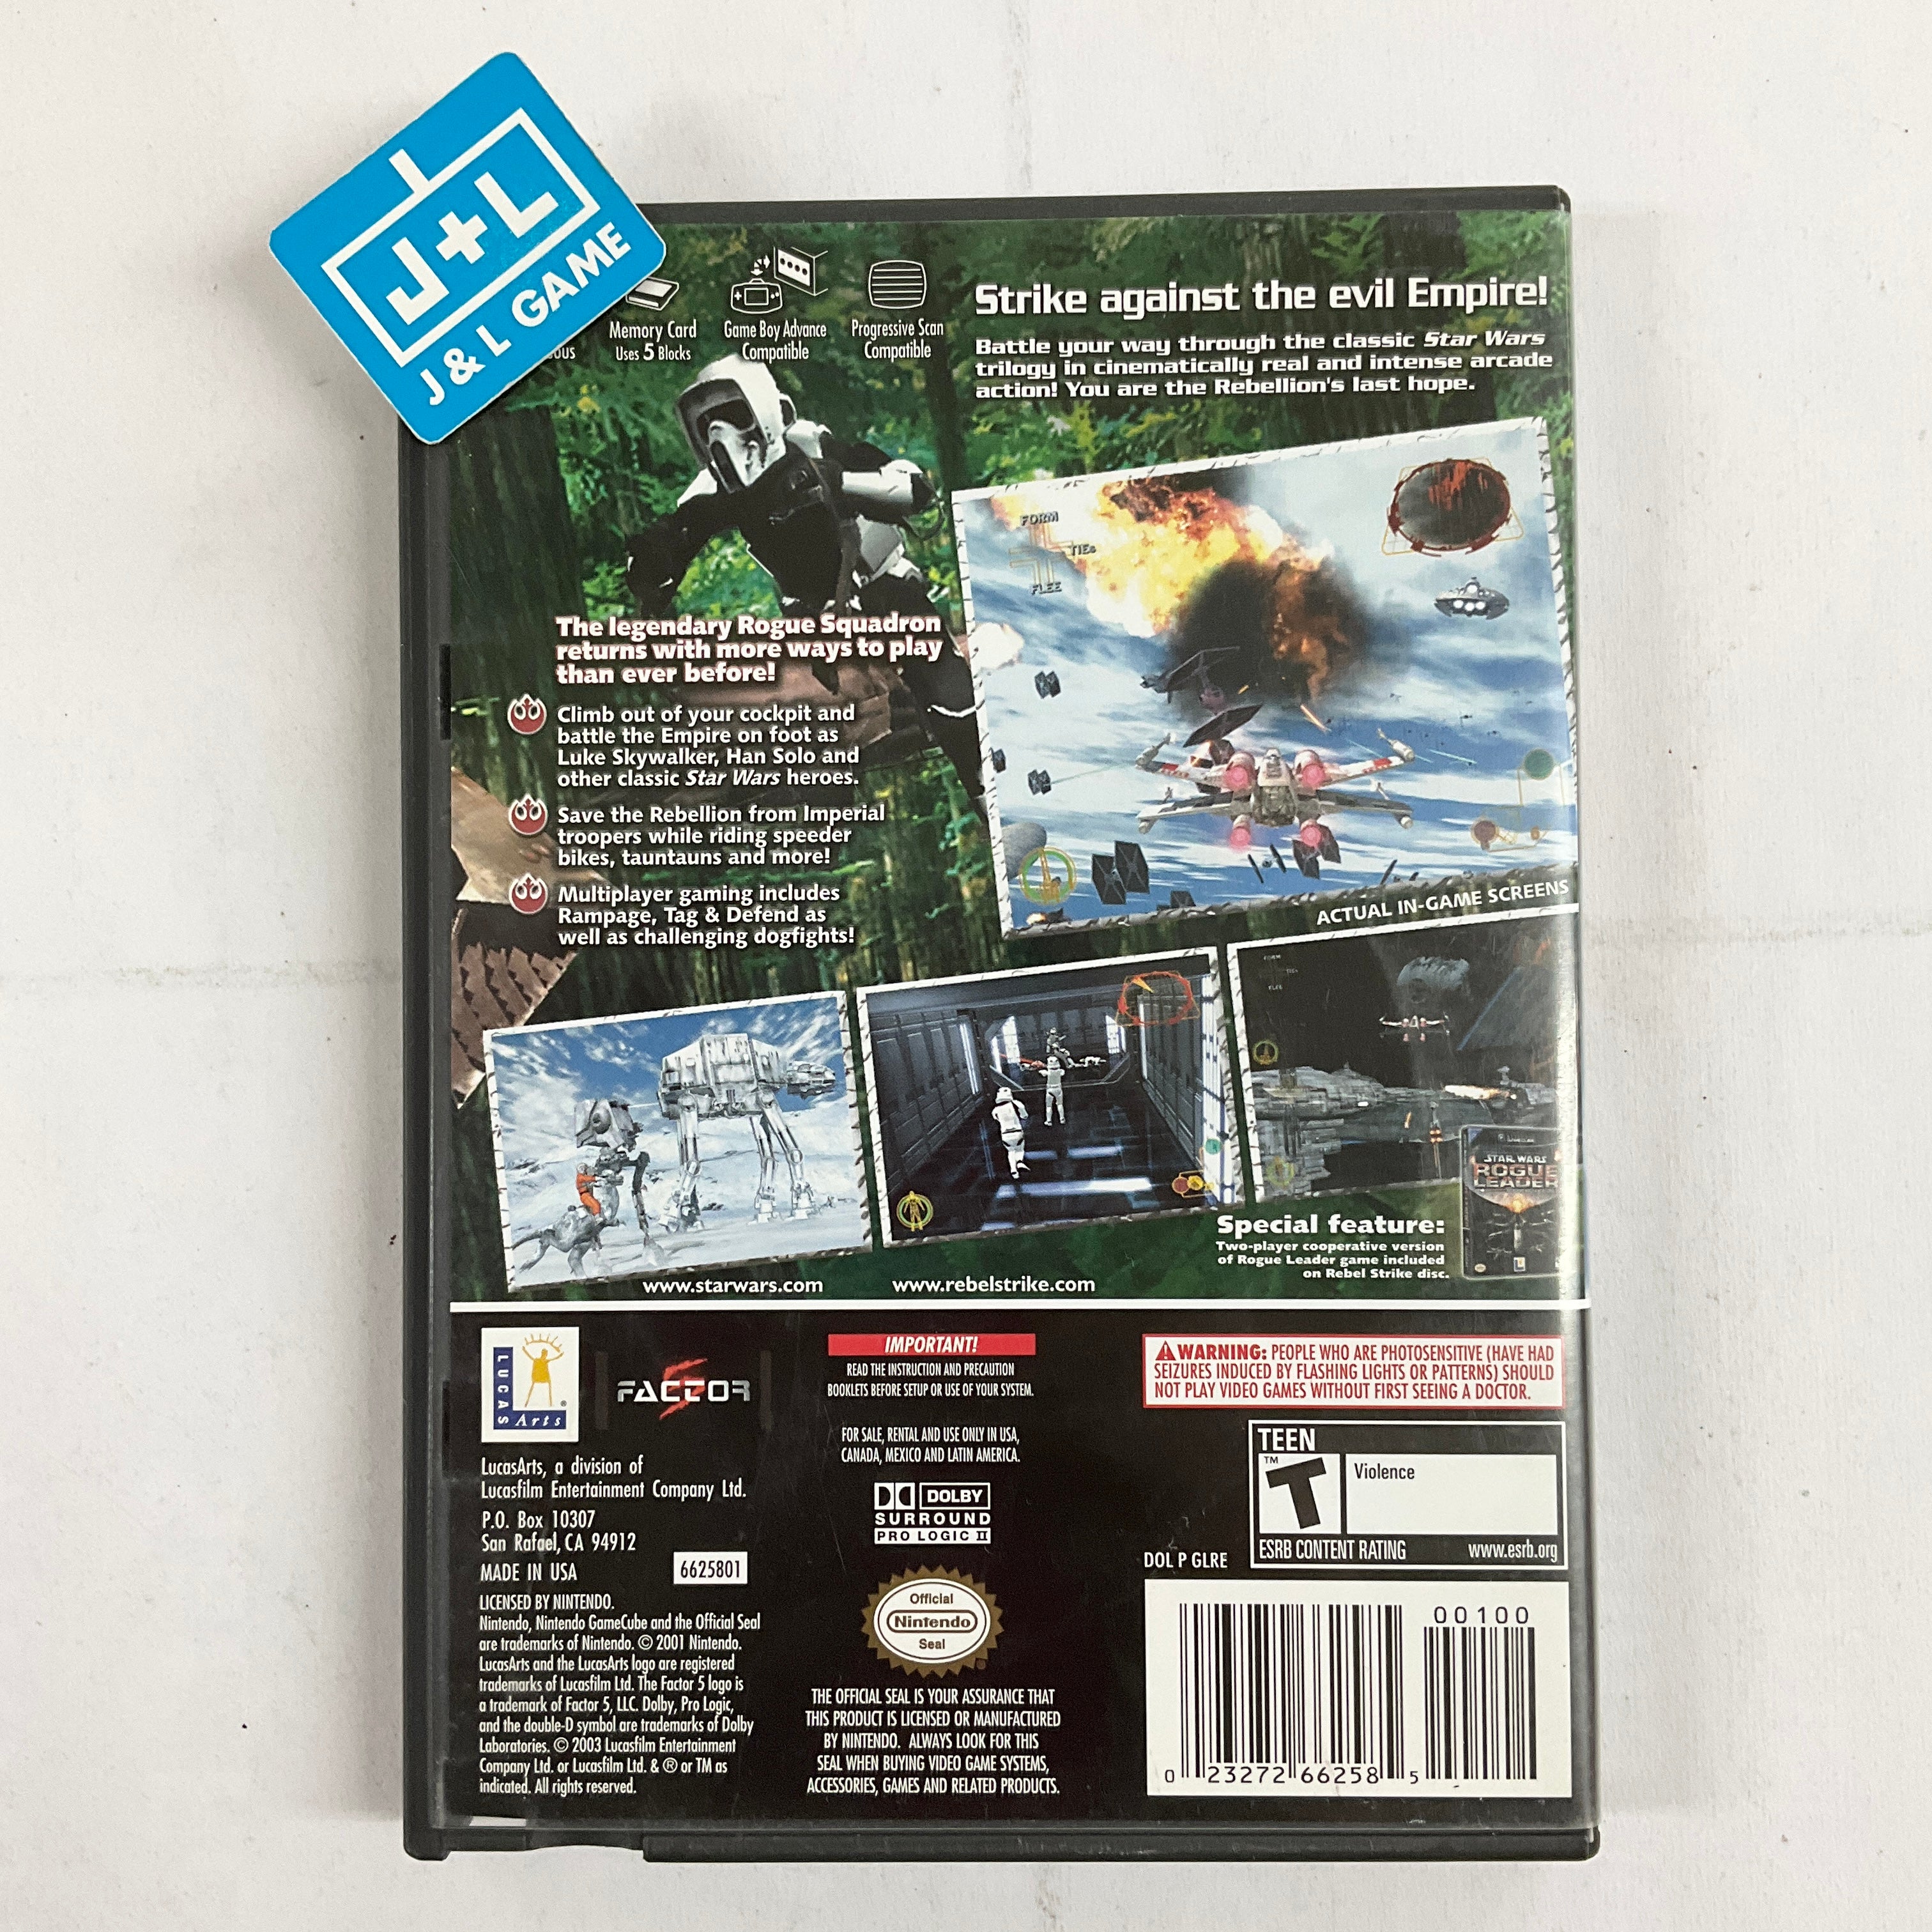 Star Wars Rogue Squadron III: Rebel Strike - (GC) GameCube [Pre-Owned] Video Games LucasArts   